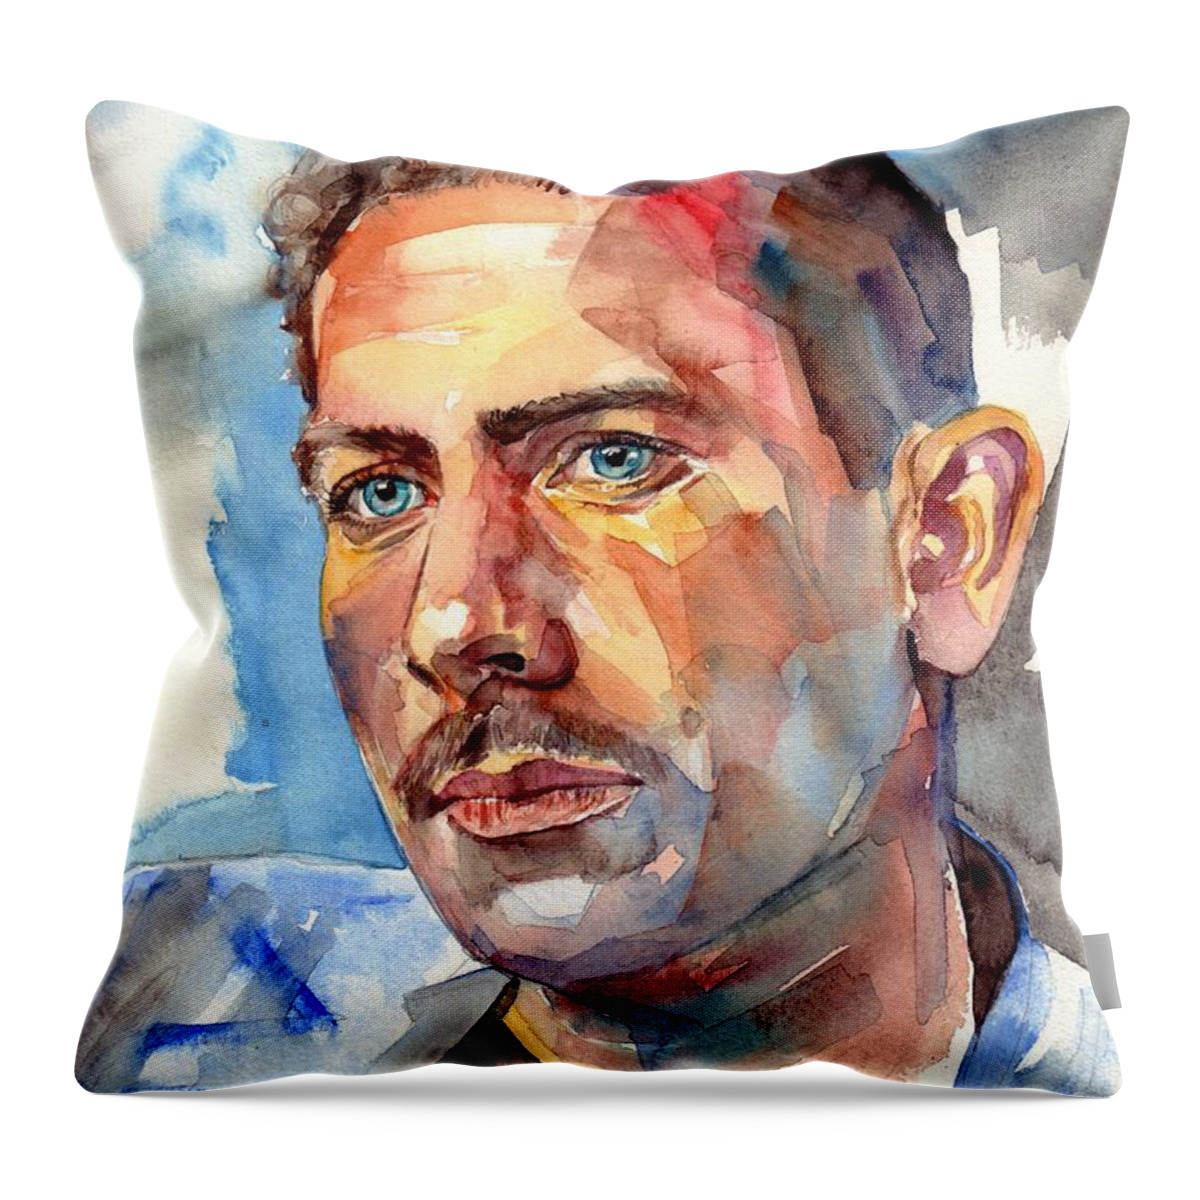 John Steinbeck Throw Pillow featuring the painting John Steinbeck Portrait by Suzann Sines